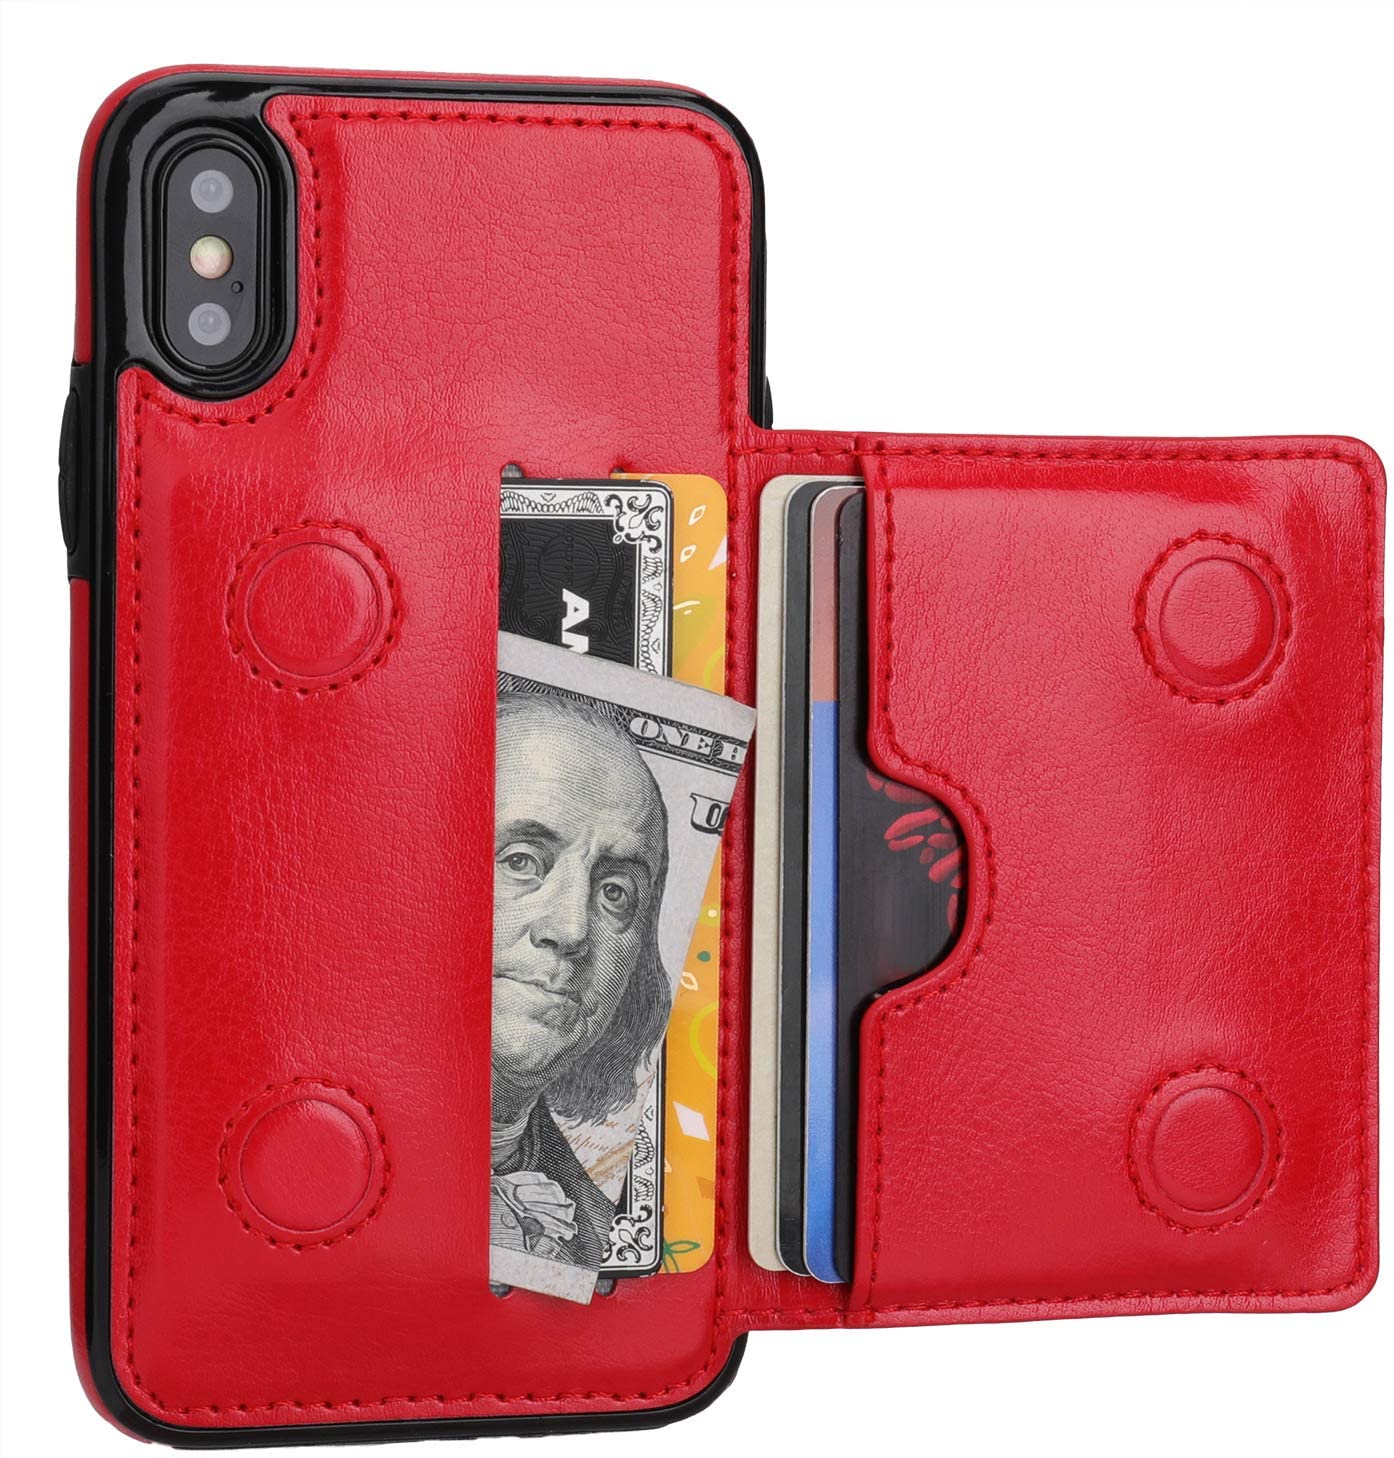 Leather Cover Compatible with iPhone X red Wallet Case for iPhone X 